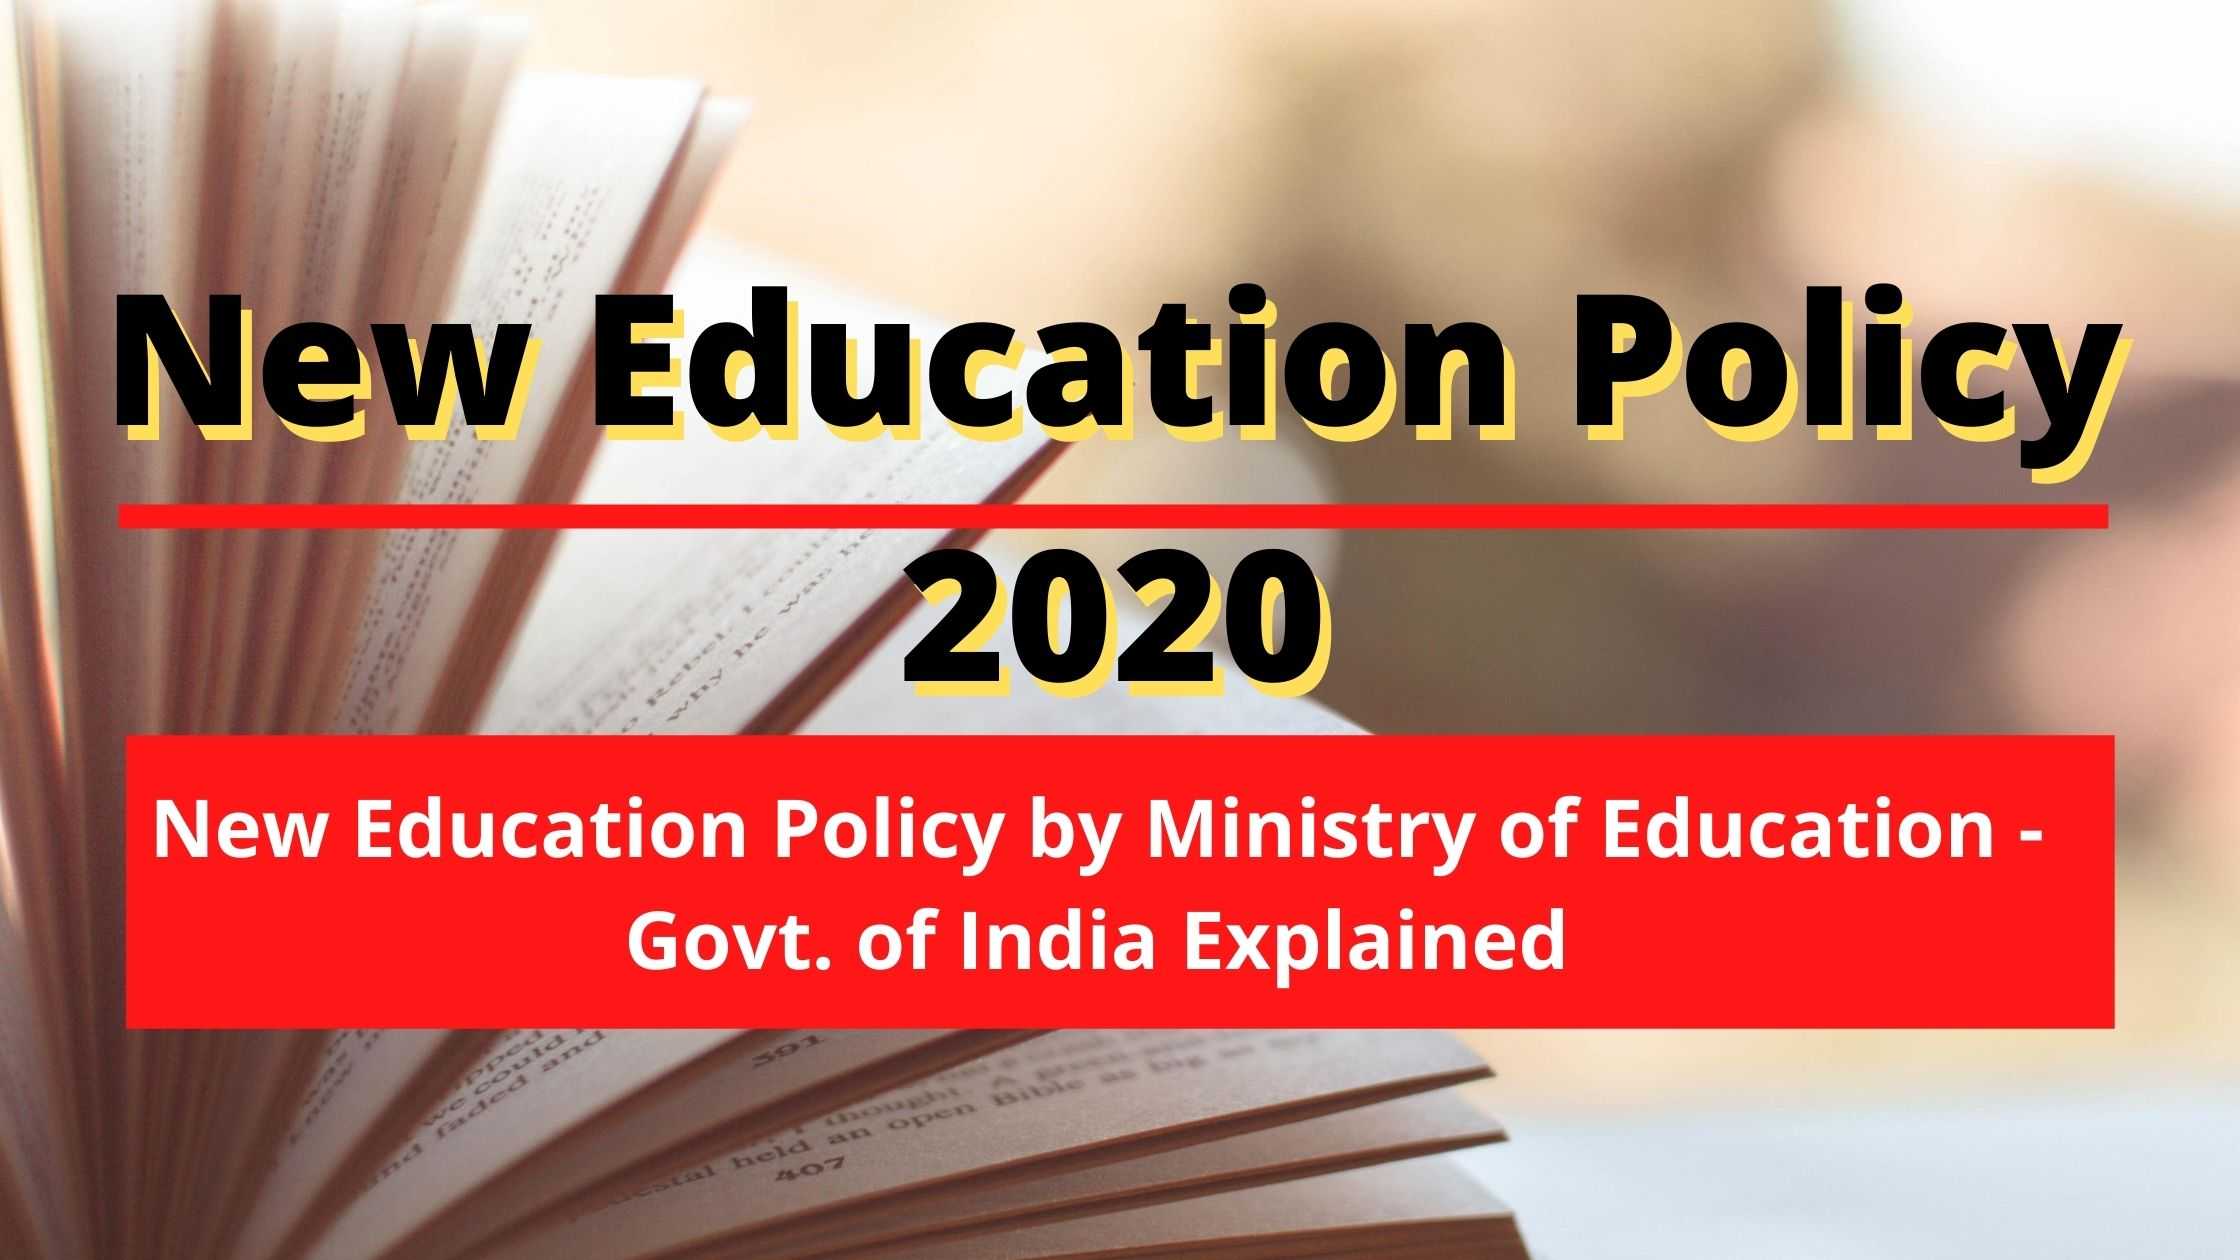 New Board Exam Pattern From 2022-23 Session